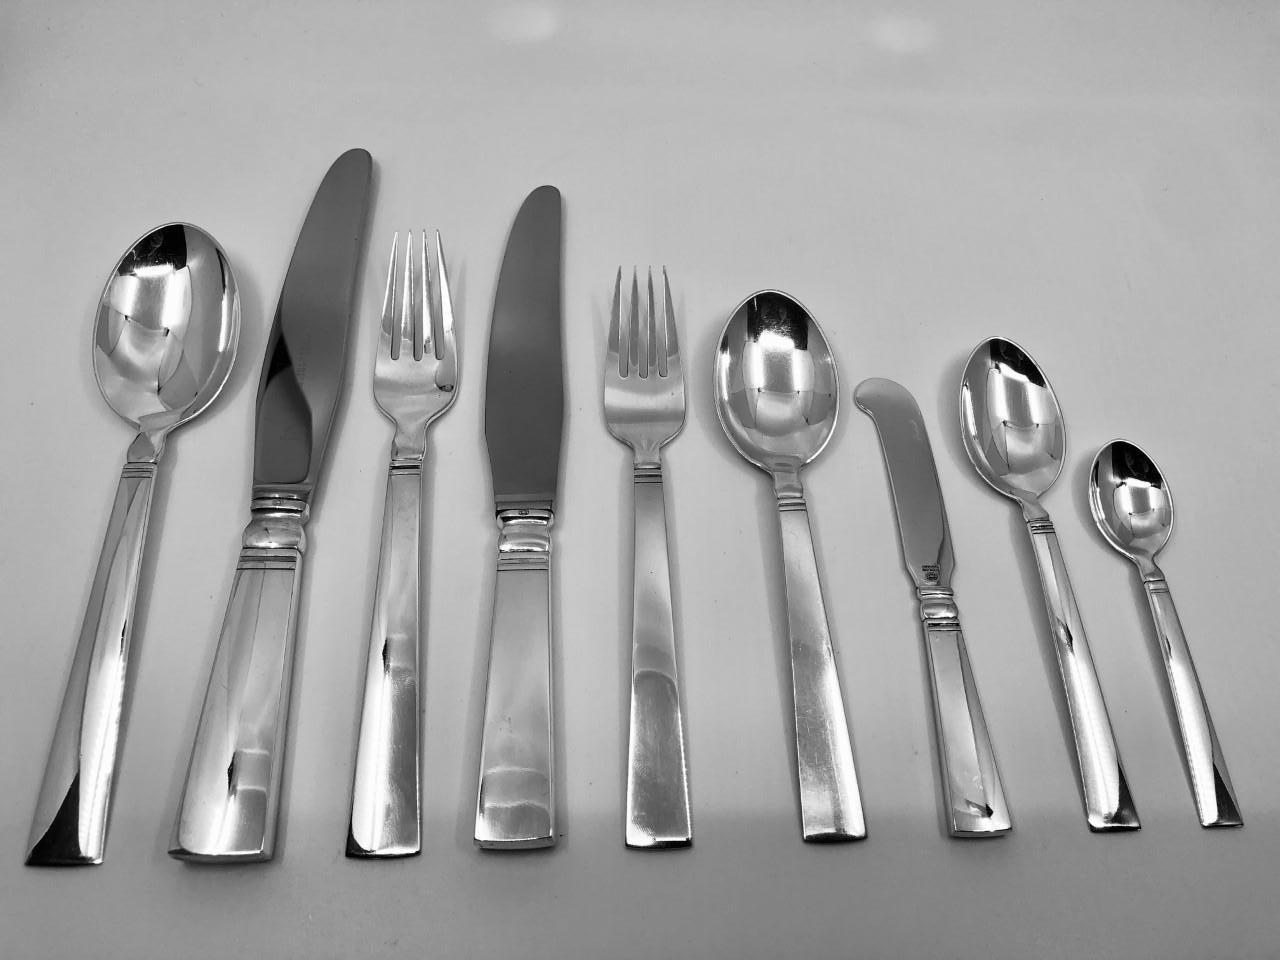 This is a Georg Jensen sterling silverware service in the Acadia pattern, design #46 by Ib Just Andersen from 1934.
This service includes 10 settings of 9 pieces. Note the dinner pieces are the extra large 